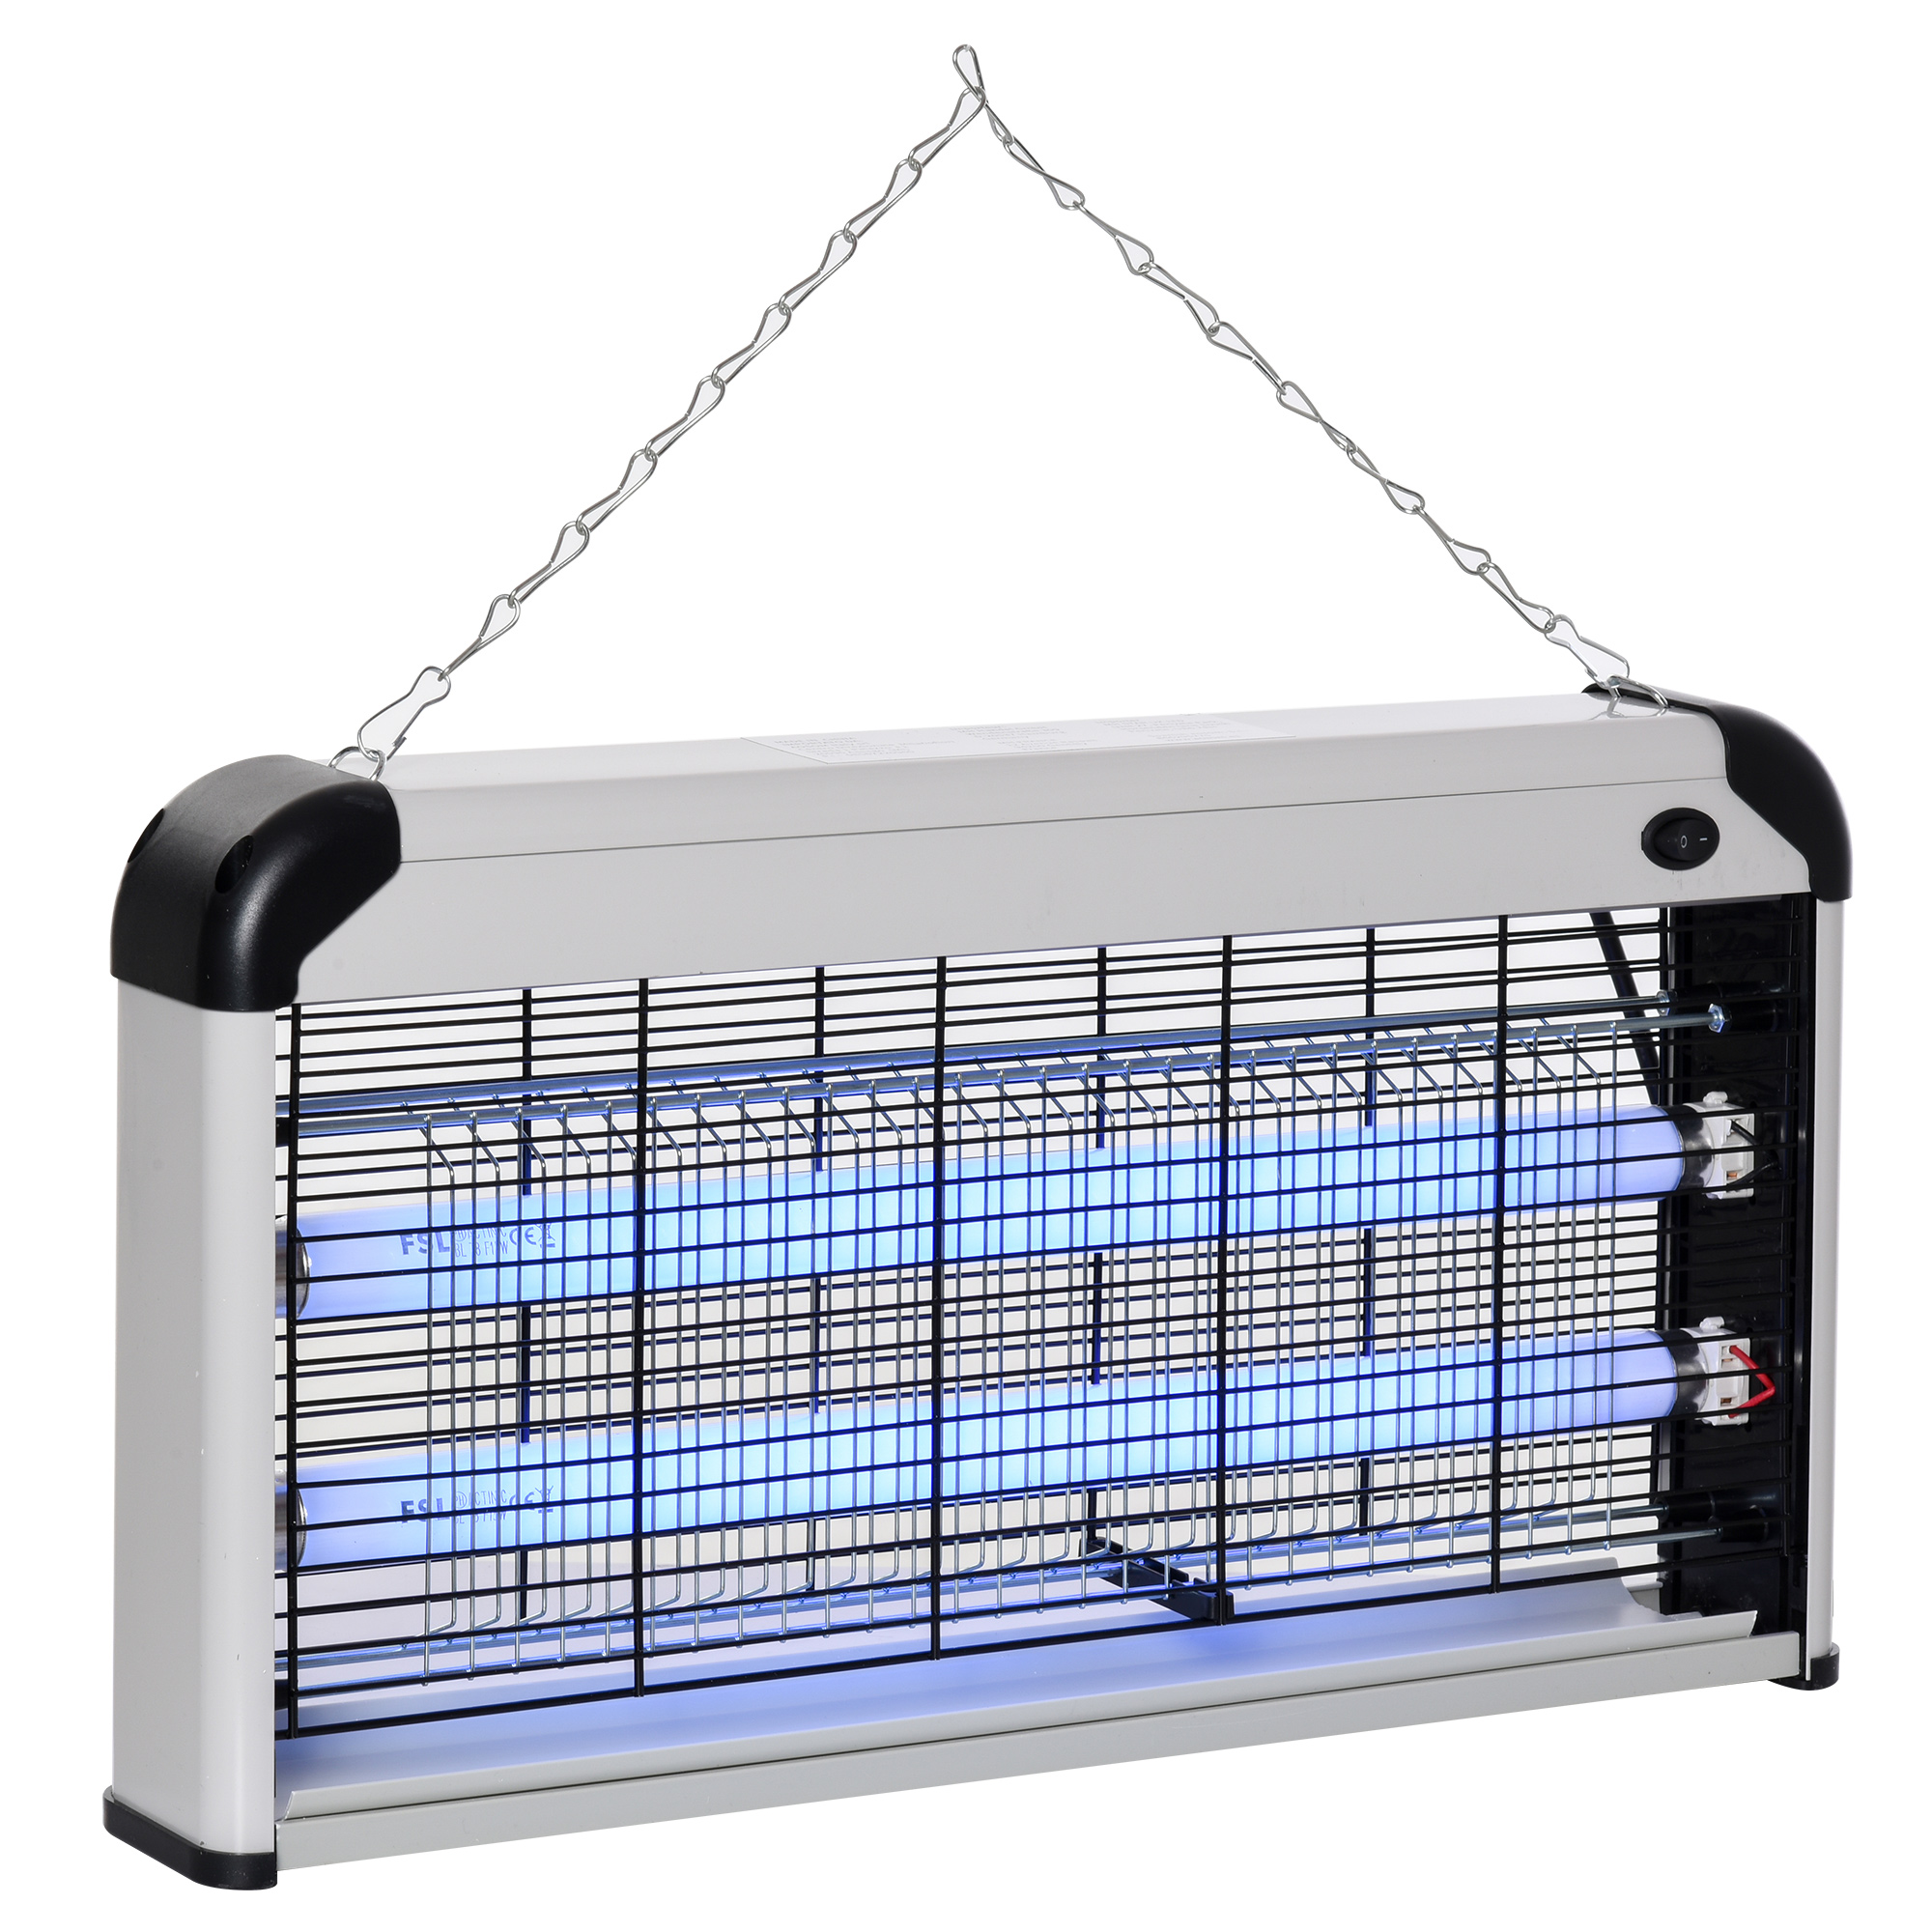 Outsunny Outsunny Outdoor and Indoor Insect Killer με λάμπα UV σκοτίας κουνουπιών για 60m²